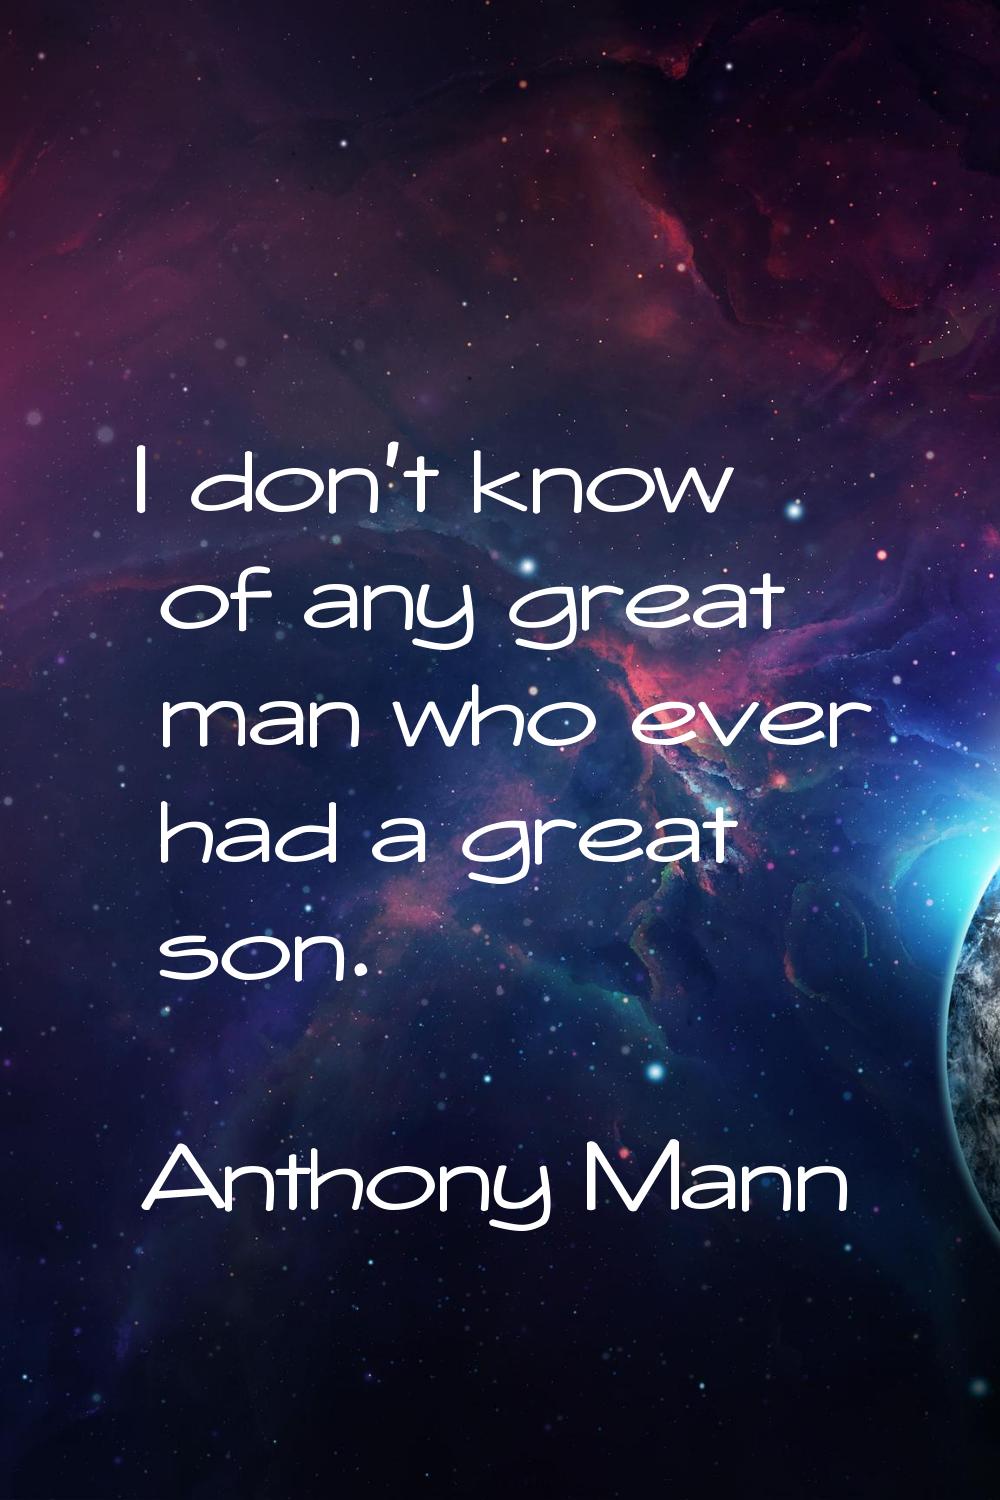 I don't know of any great man who ever had a great son.